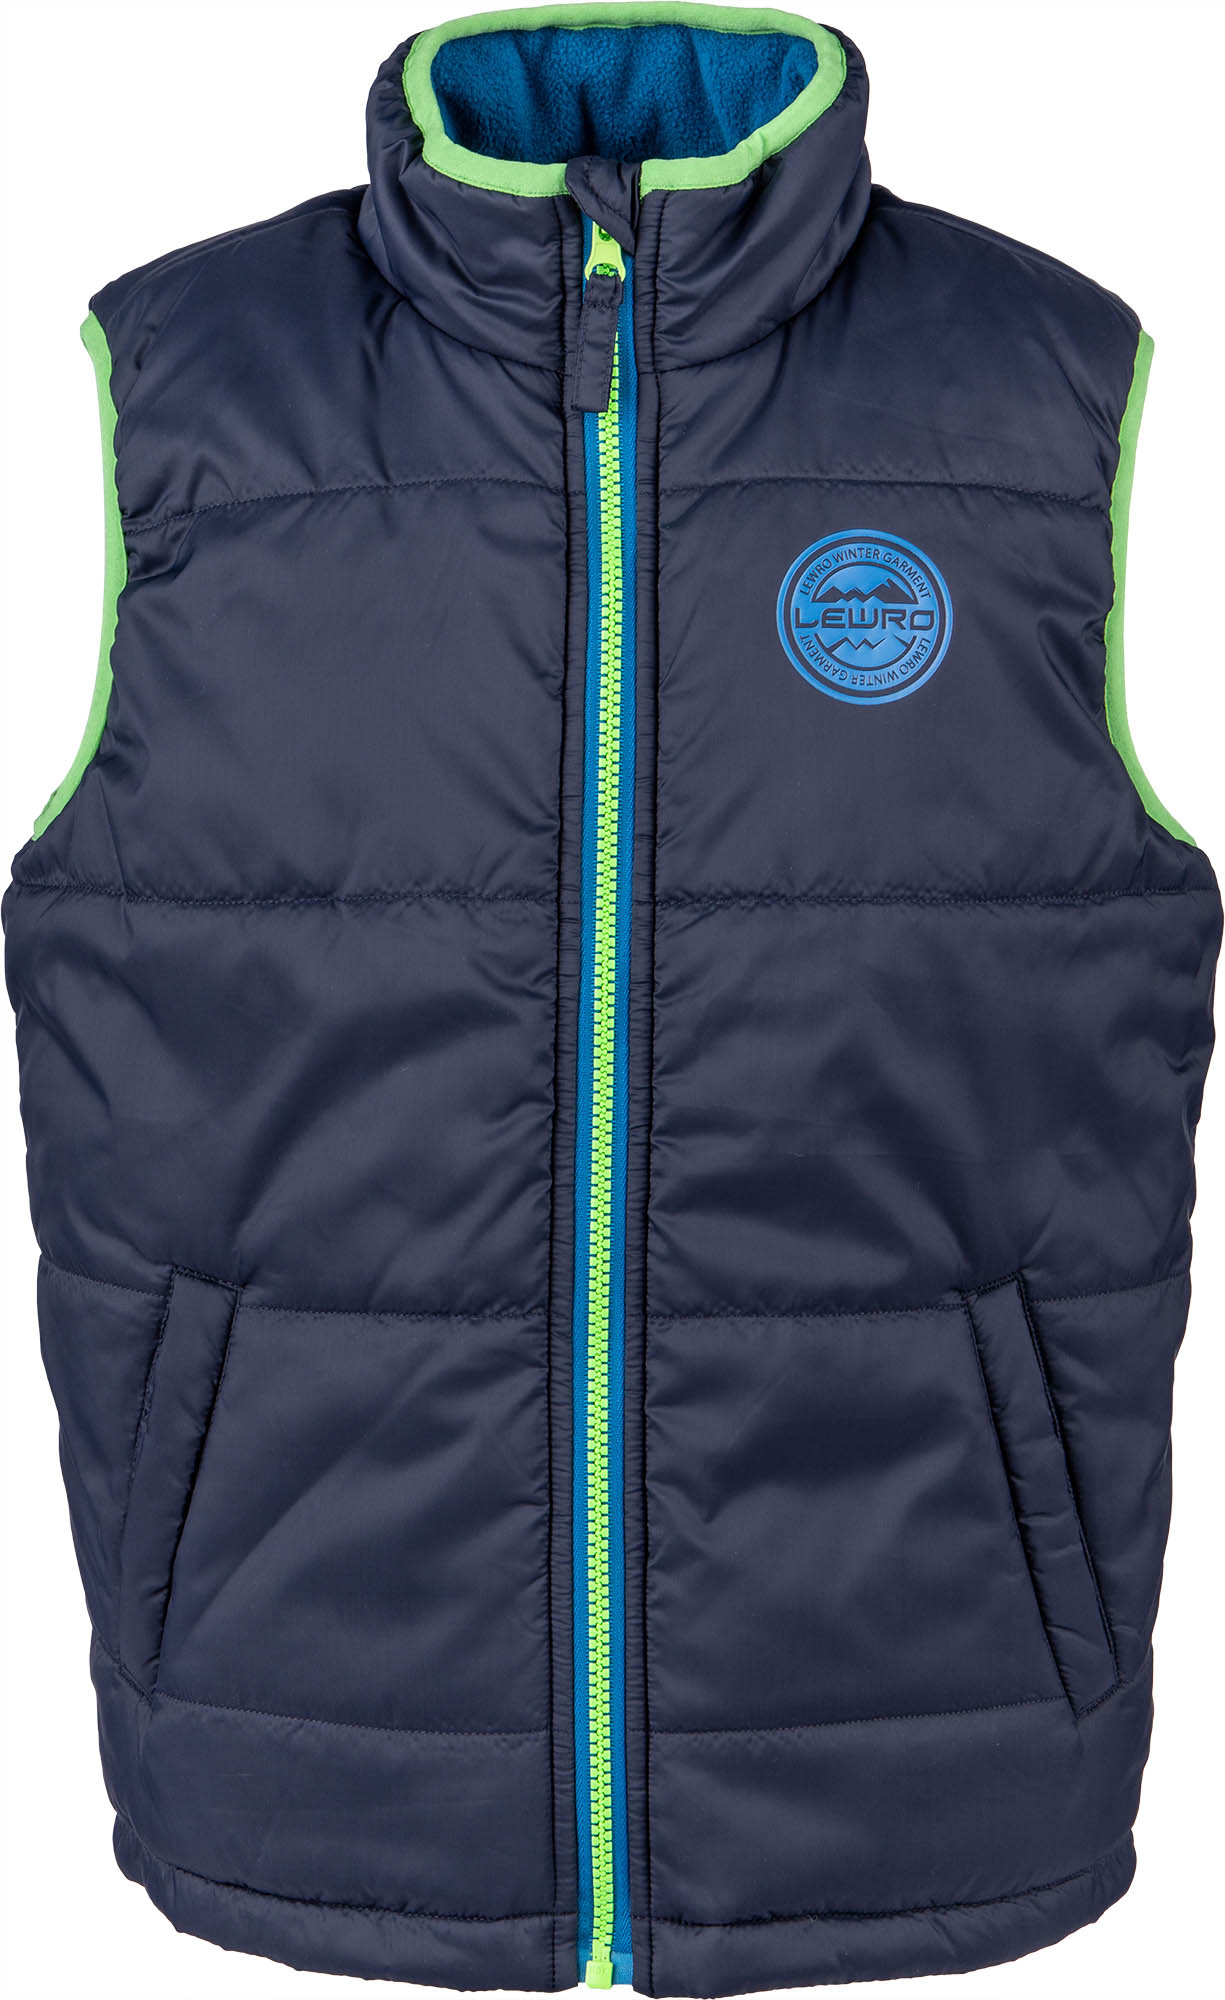 Boys’ quilted vest